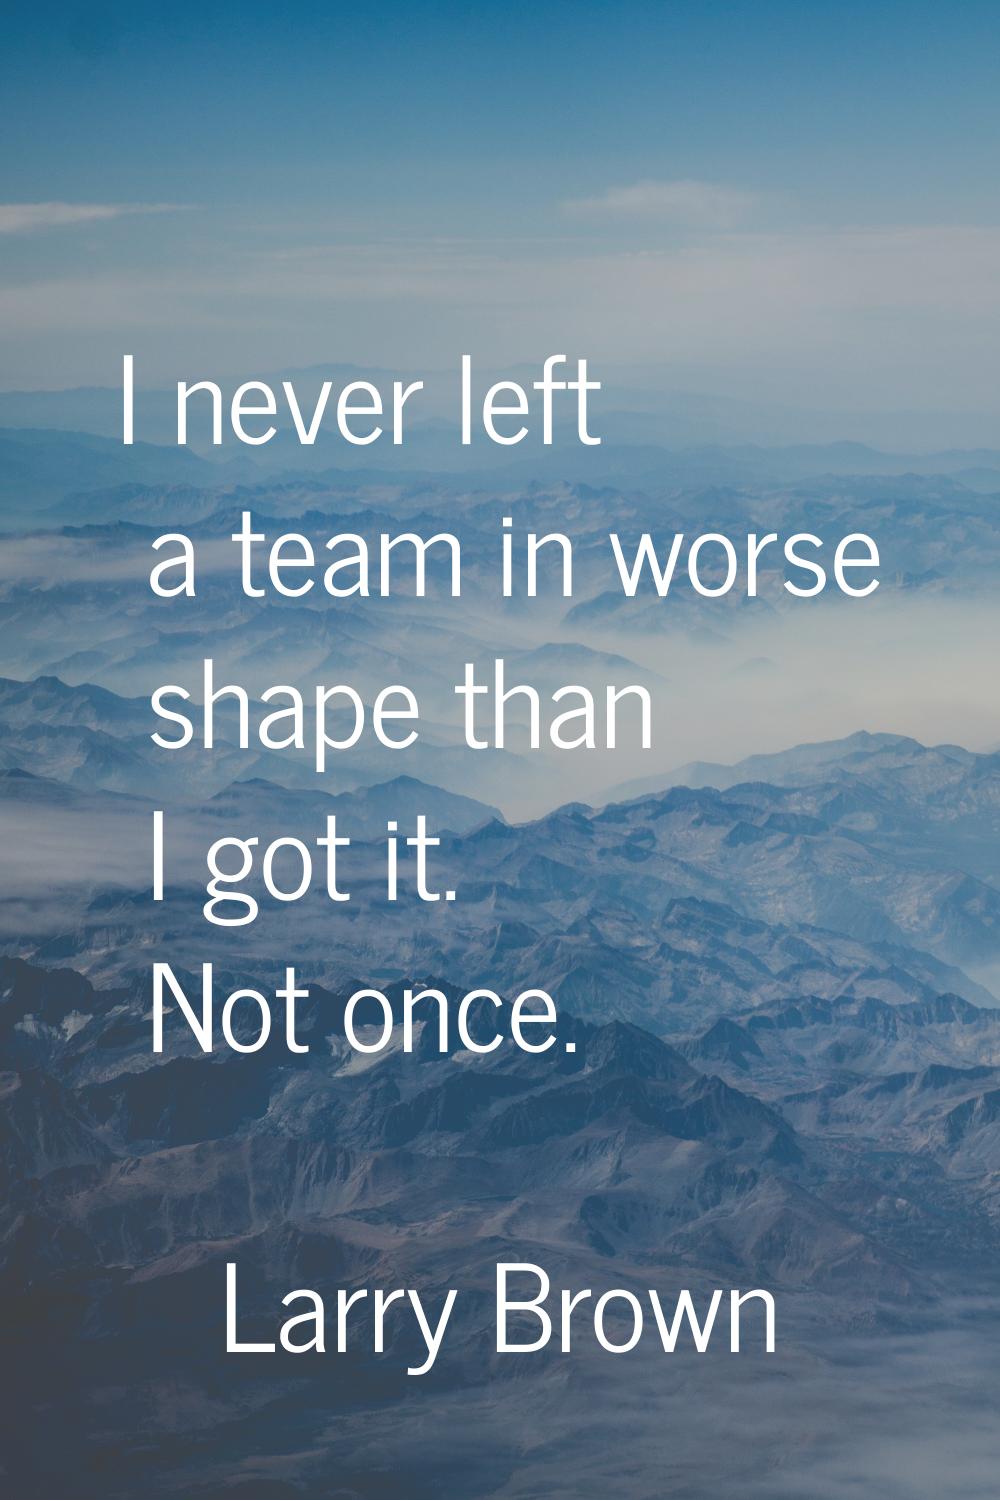 I never left a team in worse shape than I got it. Not once.